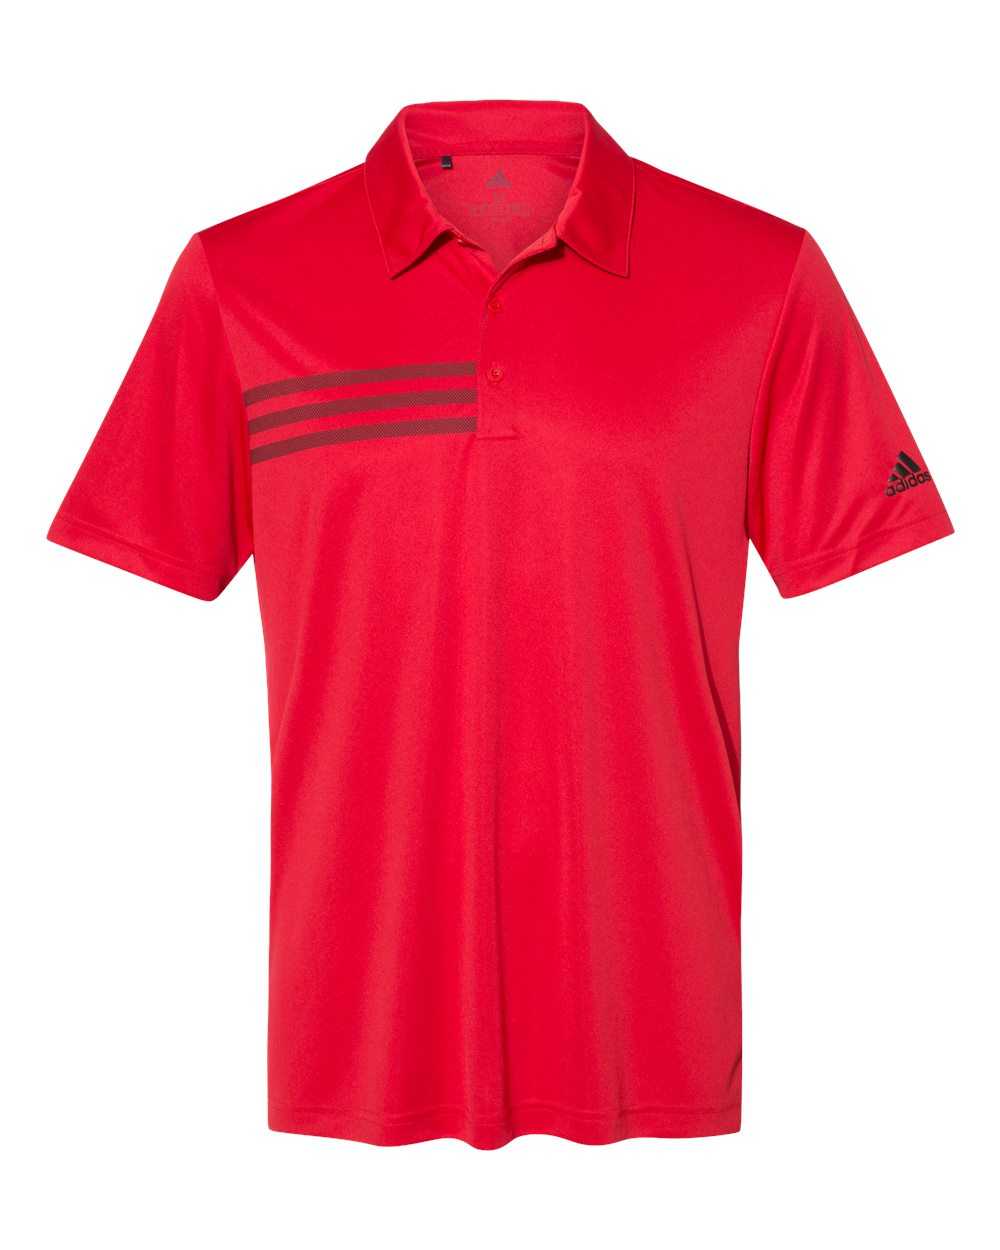 Adidas A324 3-Stripes Chest Sport Shirt - Collegiate Red Black - HIT a Double